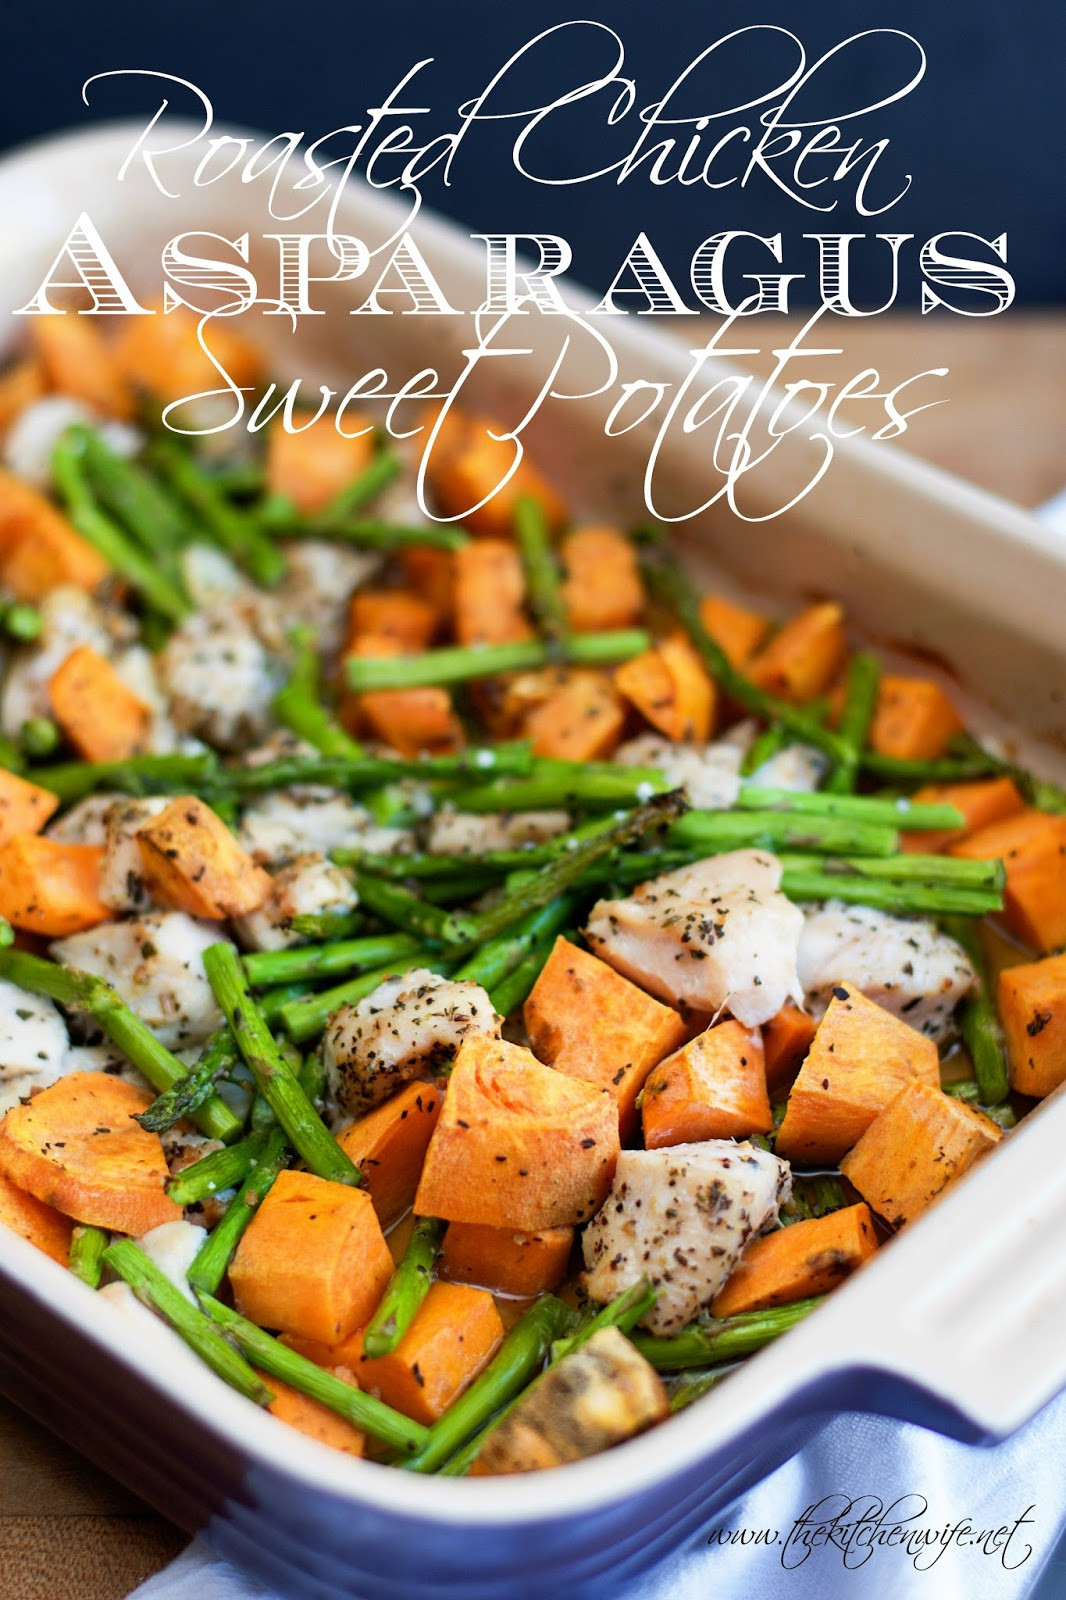 Chicken And Sweet Potato
 Roasted Chicken with Asparagus and Sweet Potato Recipe